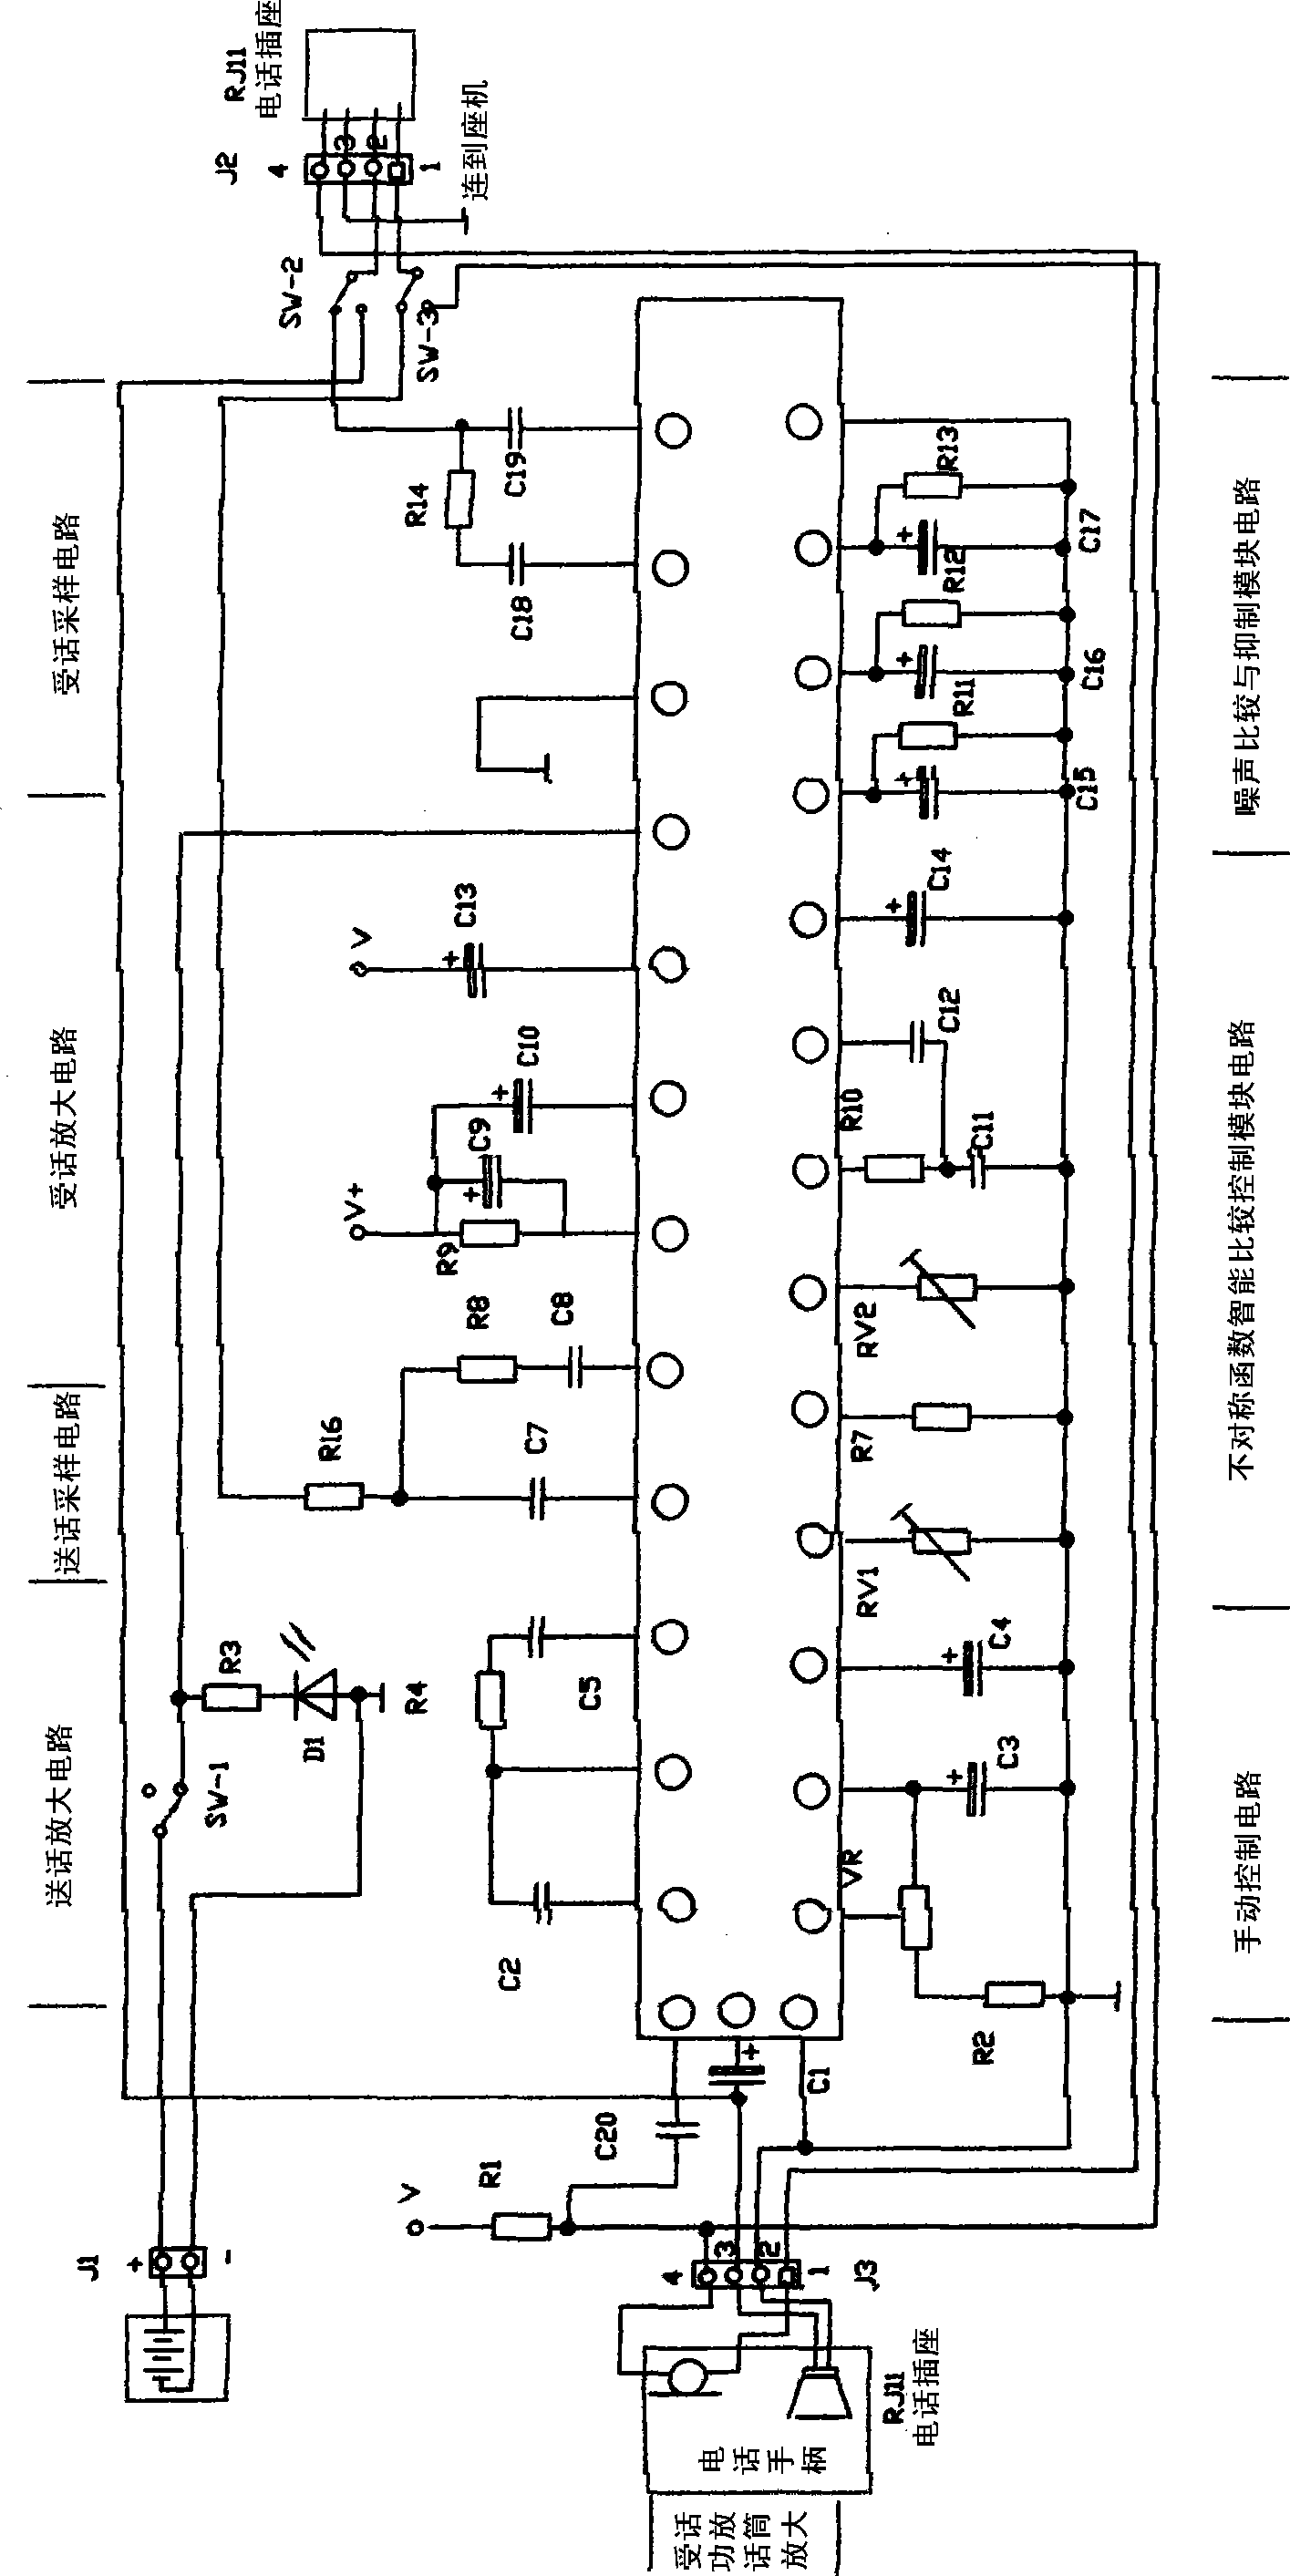 Intelligent telephone amplifier for eliminating feedback whistle, and suppressing interference noise